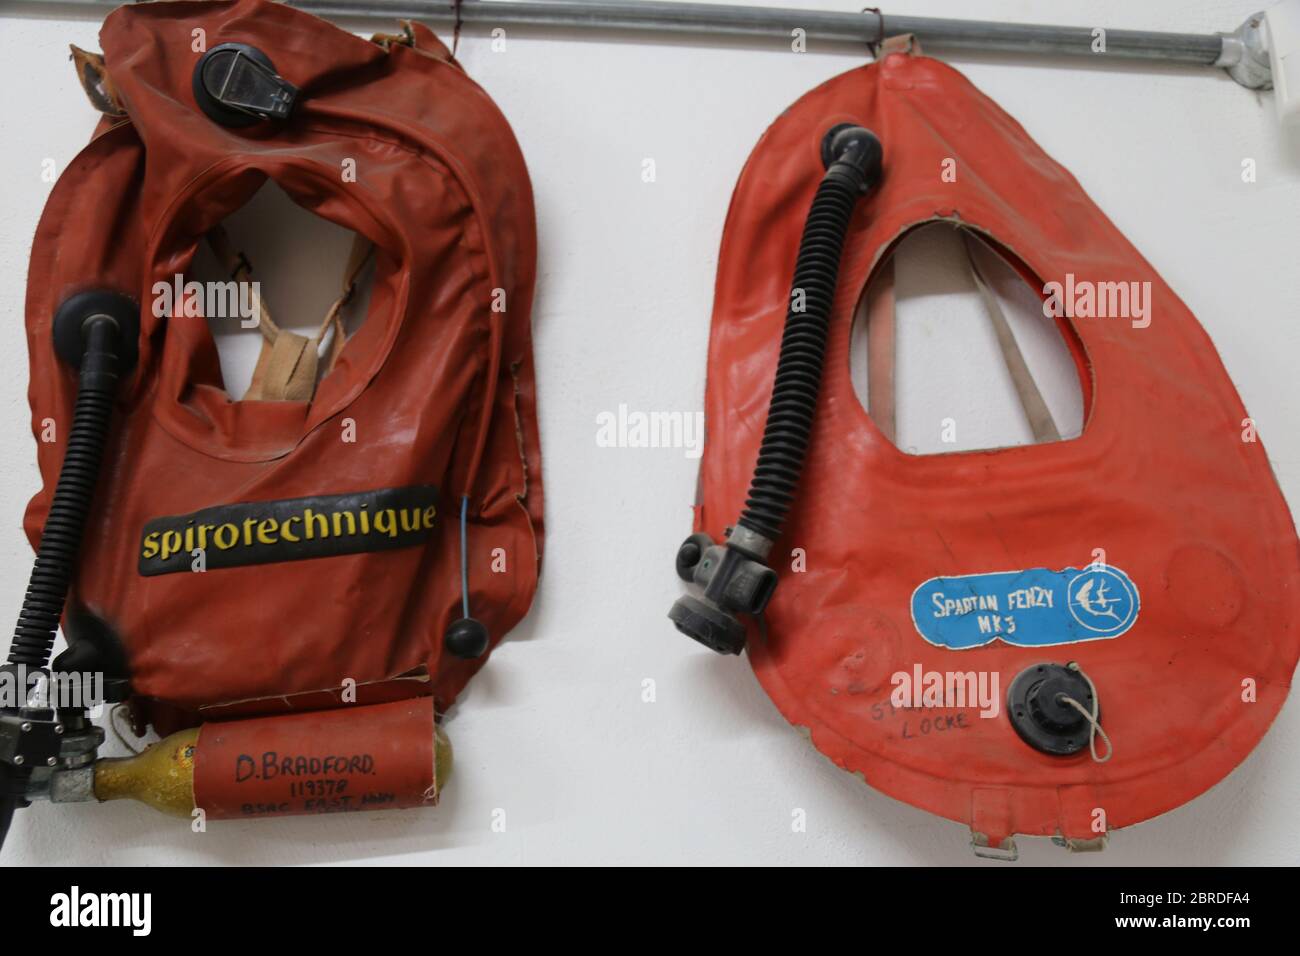 old vintage diving scuba buoyancy vest Spirotechnique and Fenzy Stock Photo  - Alamy